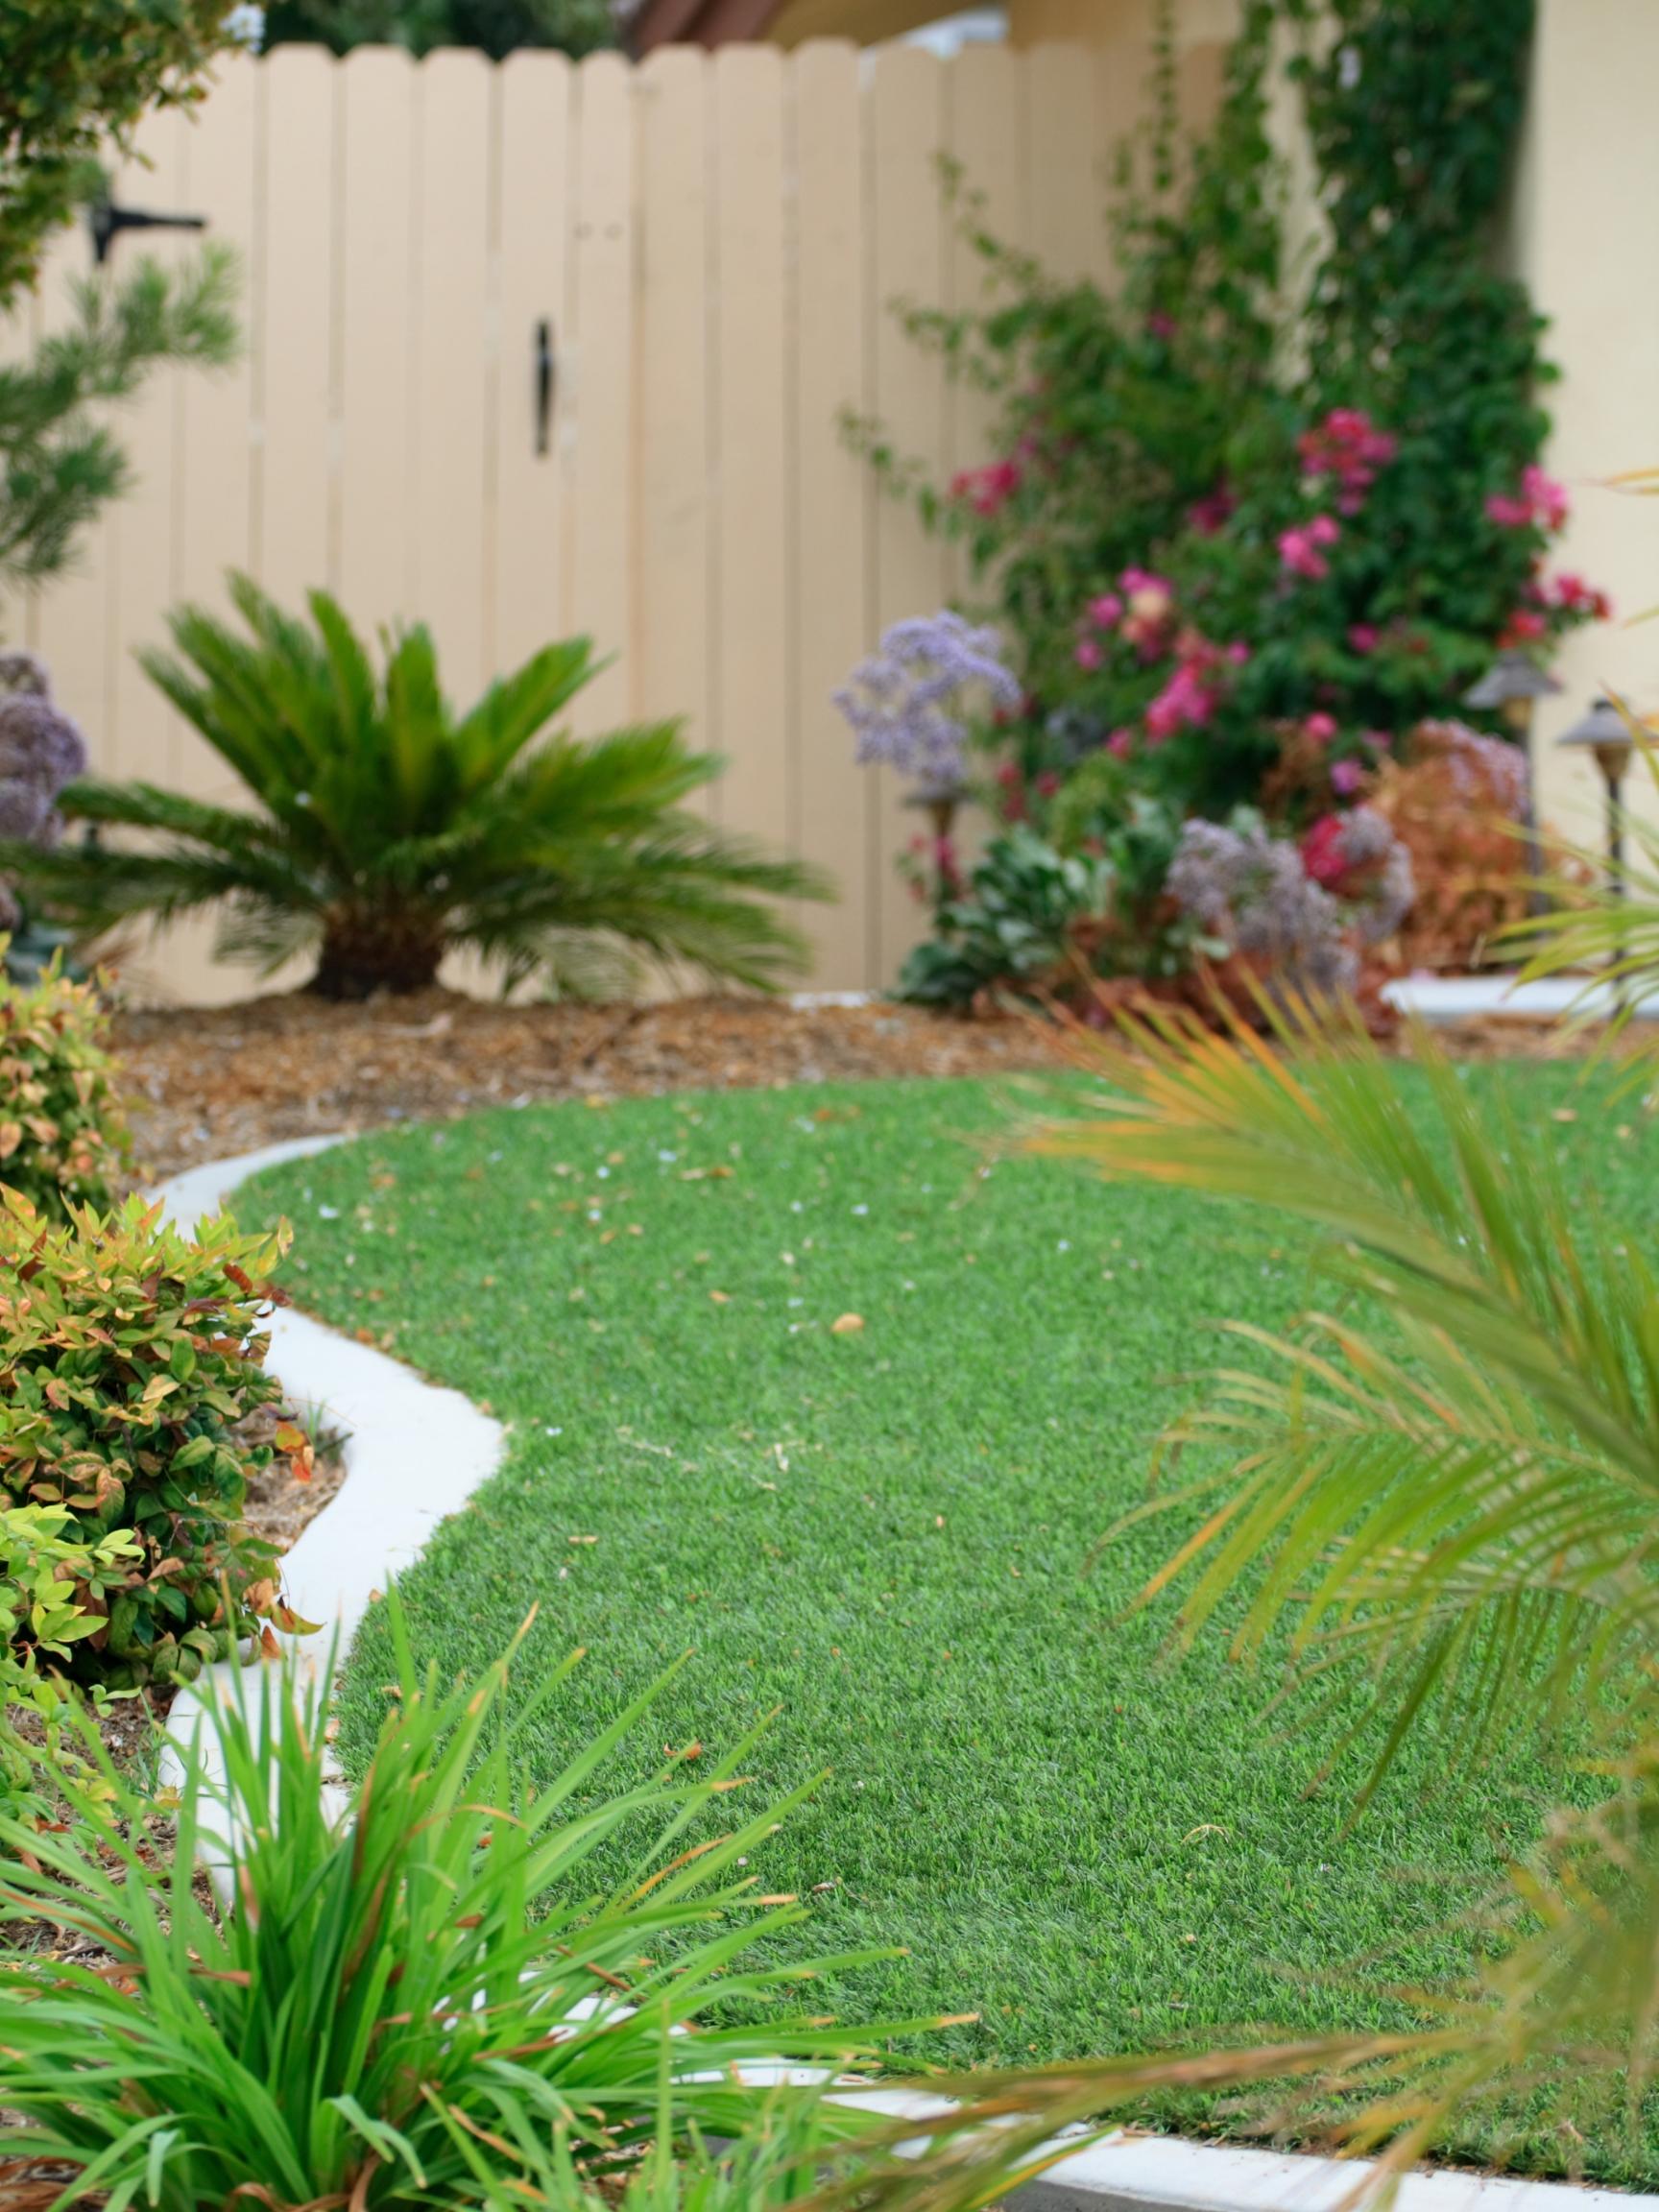 A Homeowners’ Guide to Artificial Turf